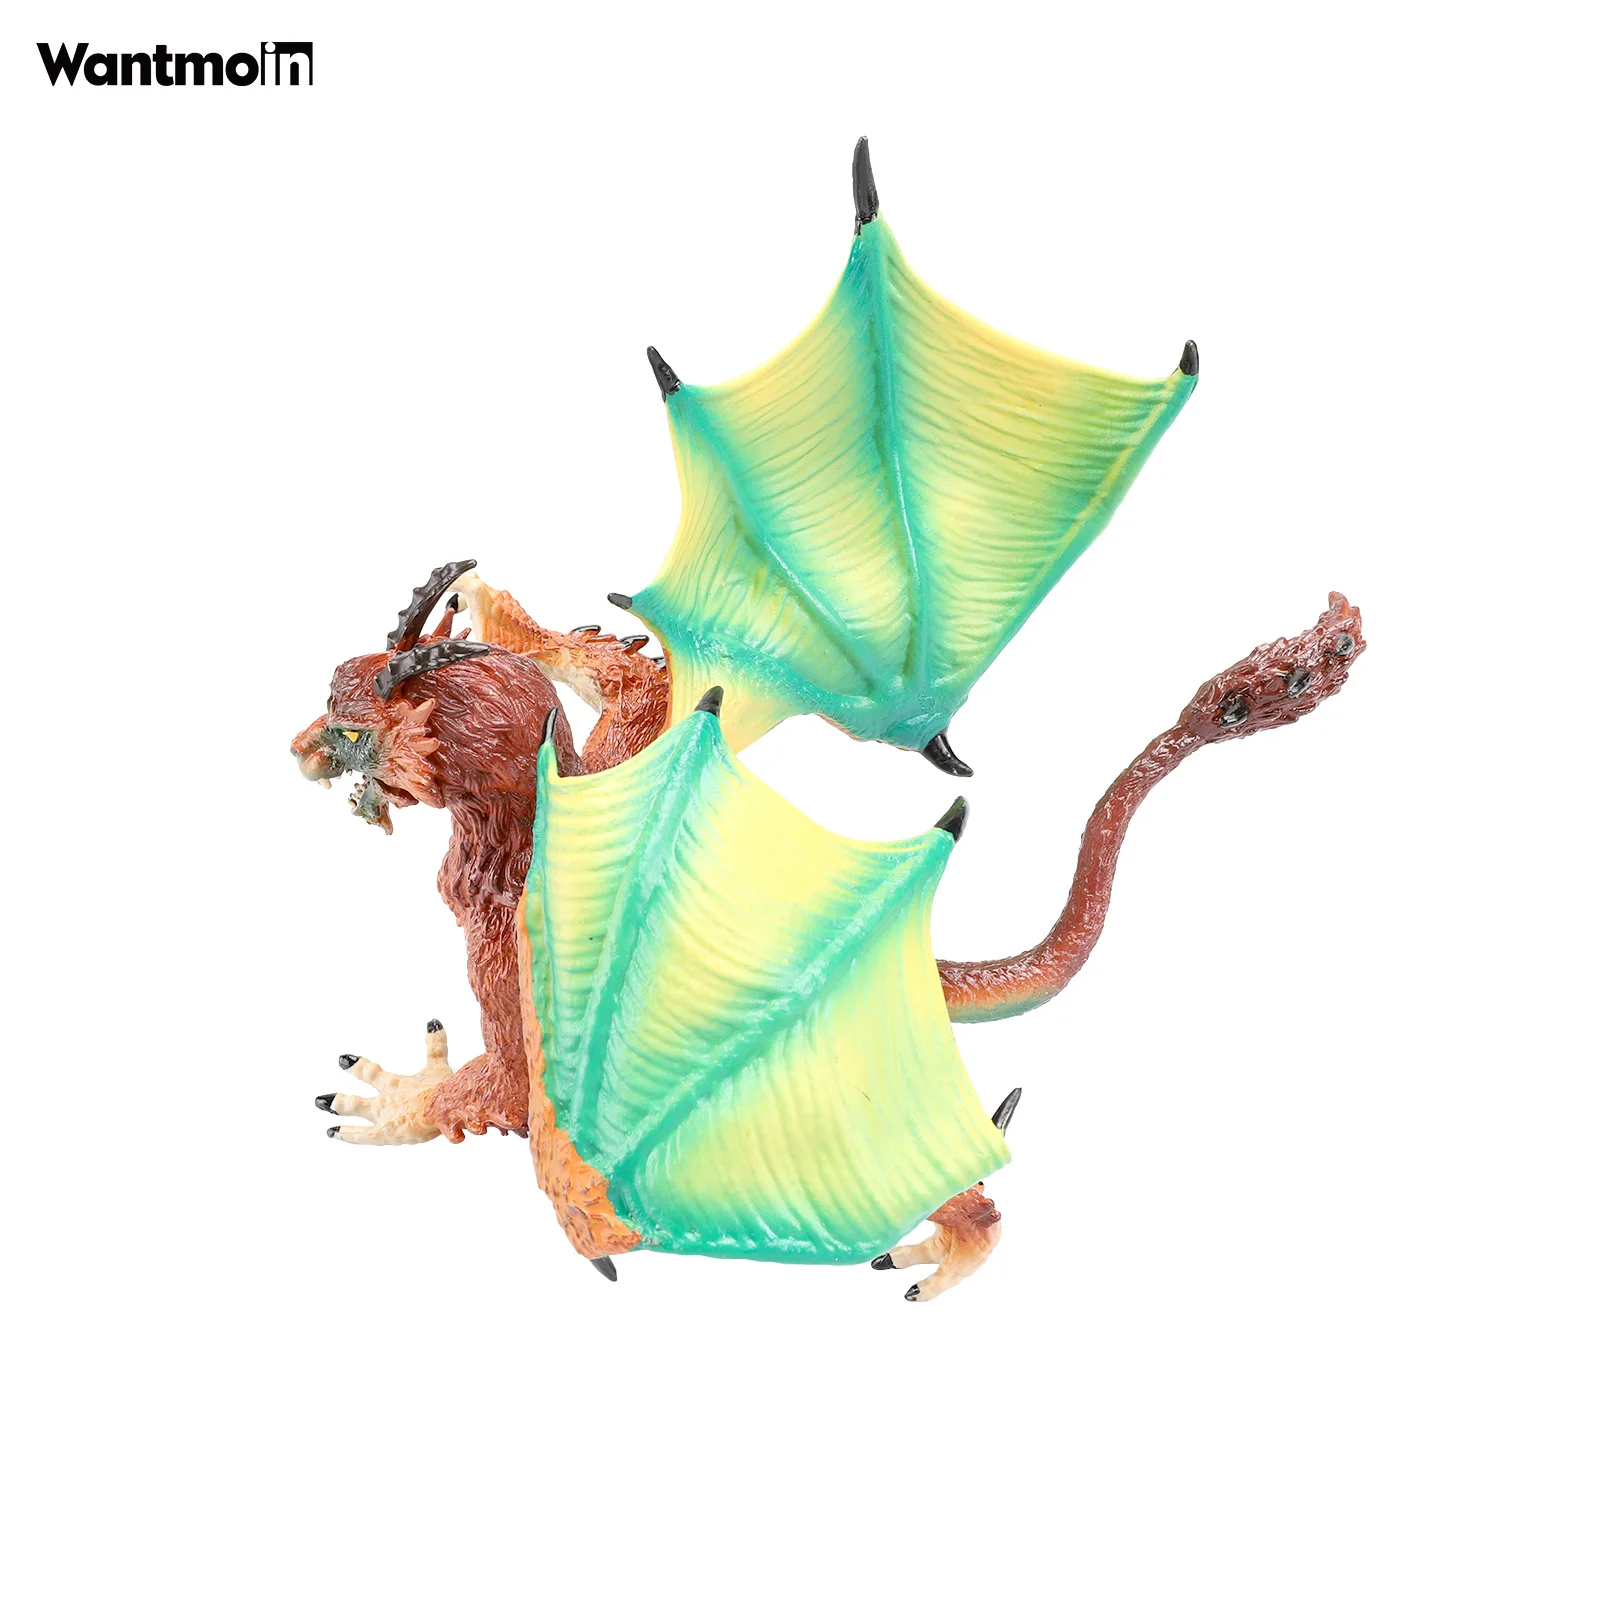 Buy Wantmoin Untamed Legends Dragon toy -plastic dragon Animal Figurine for Collection Gift Home Decoration Party Favor on